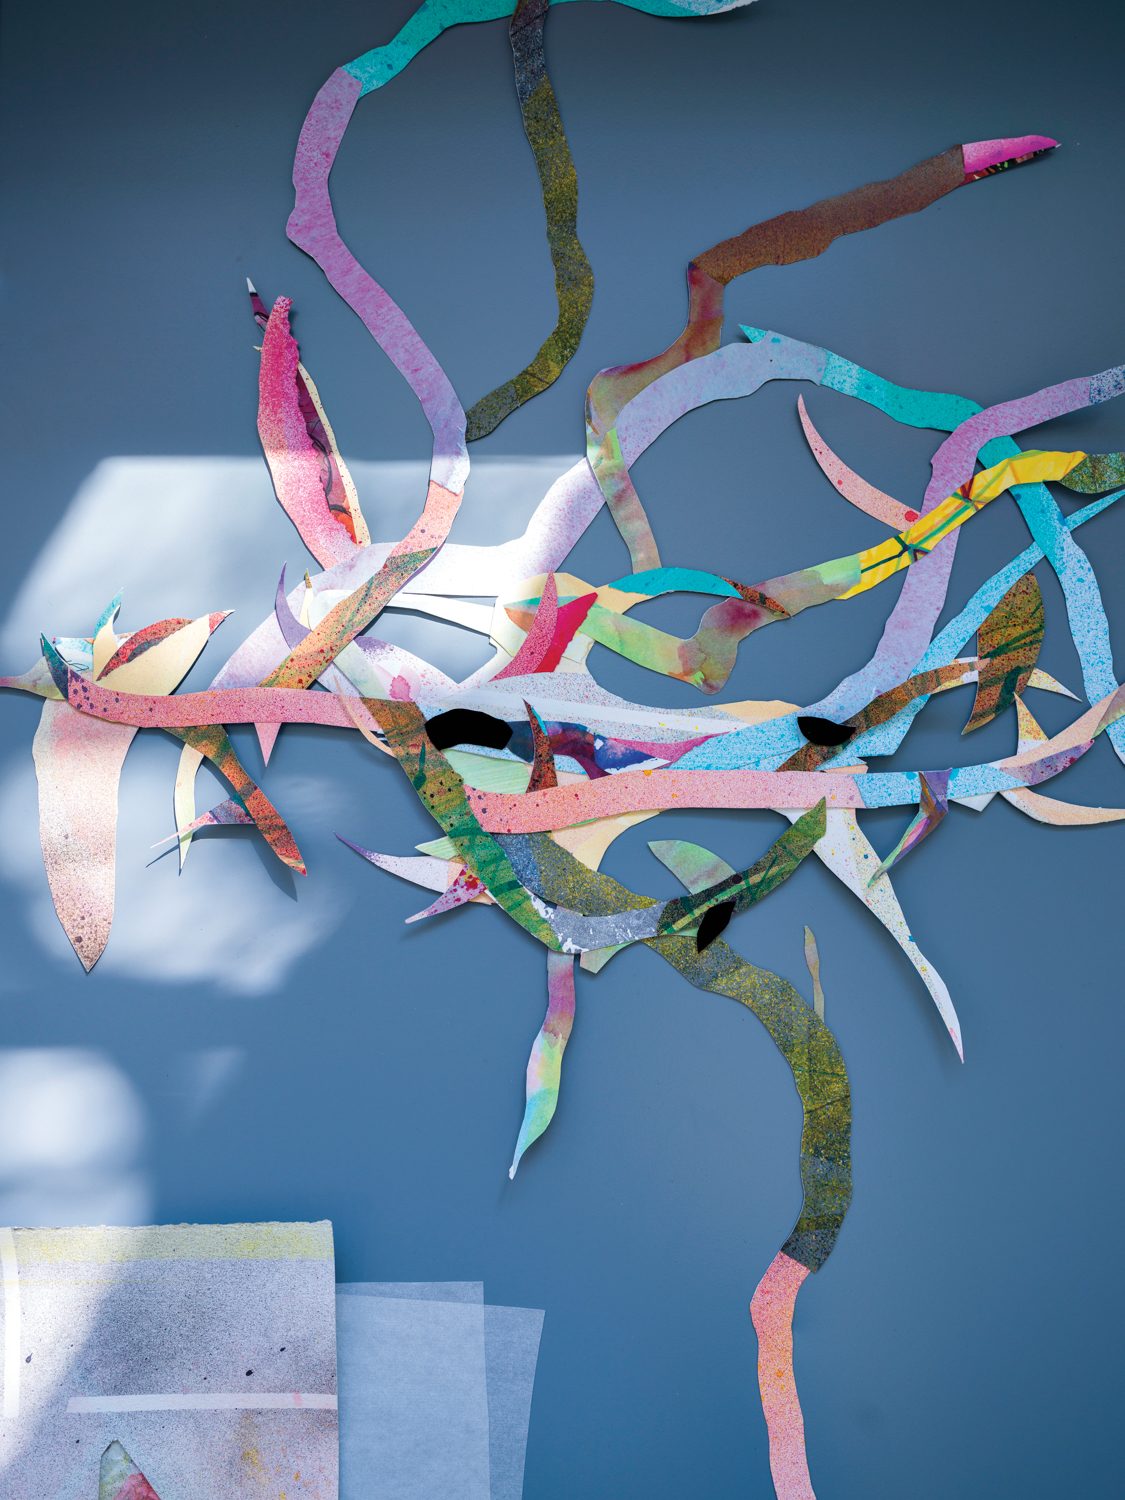 A delicate layering of colored paper that gives the impression of thorns.